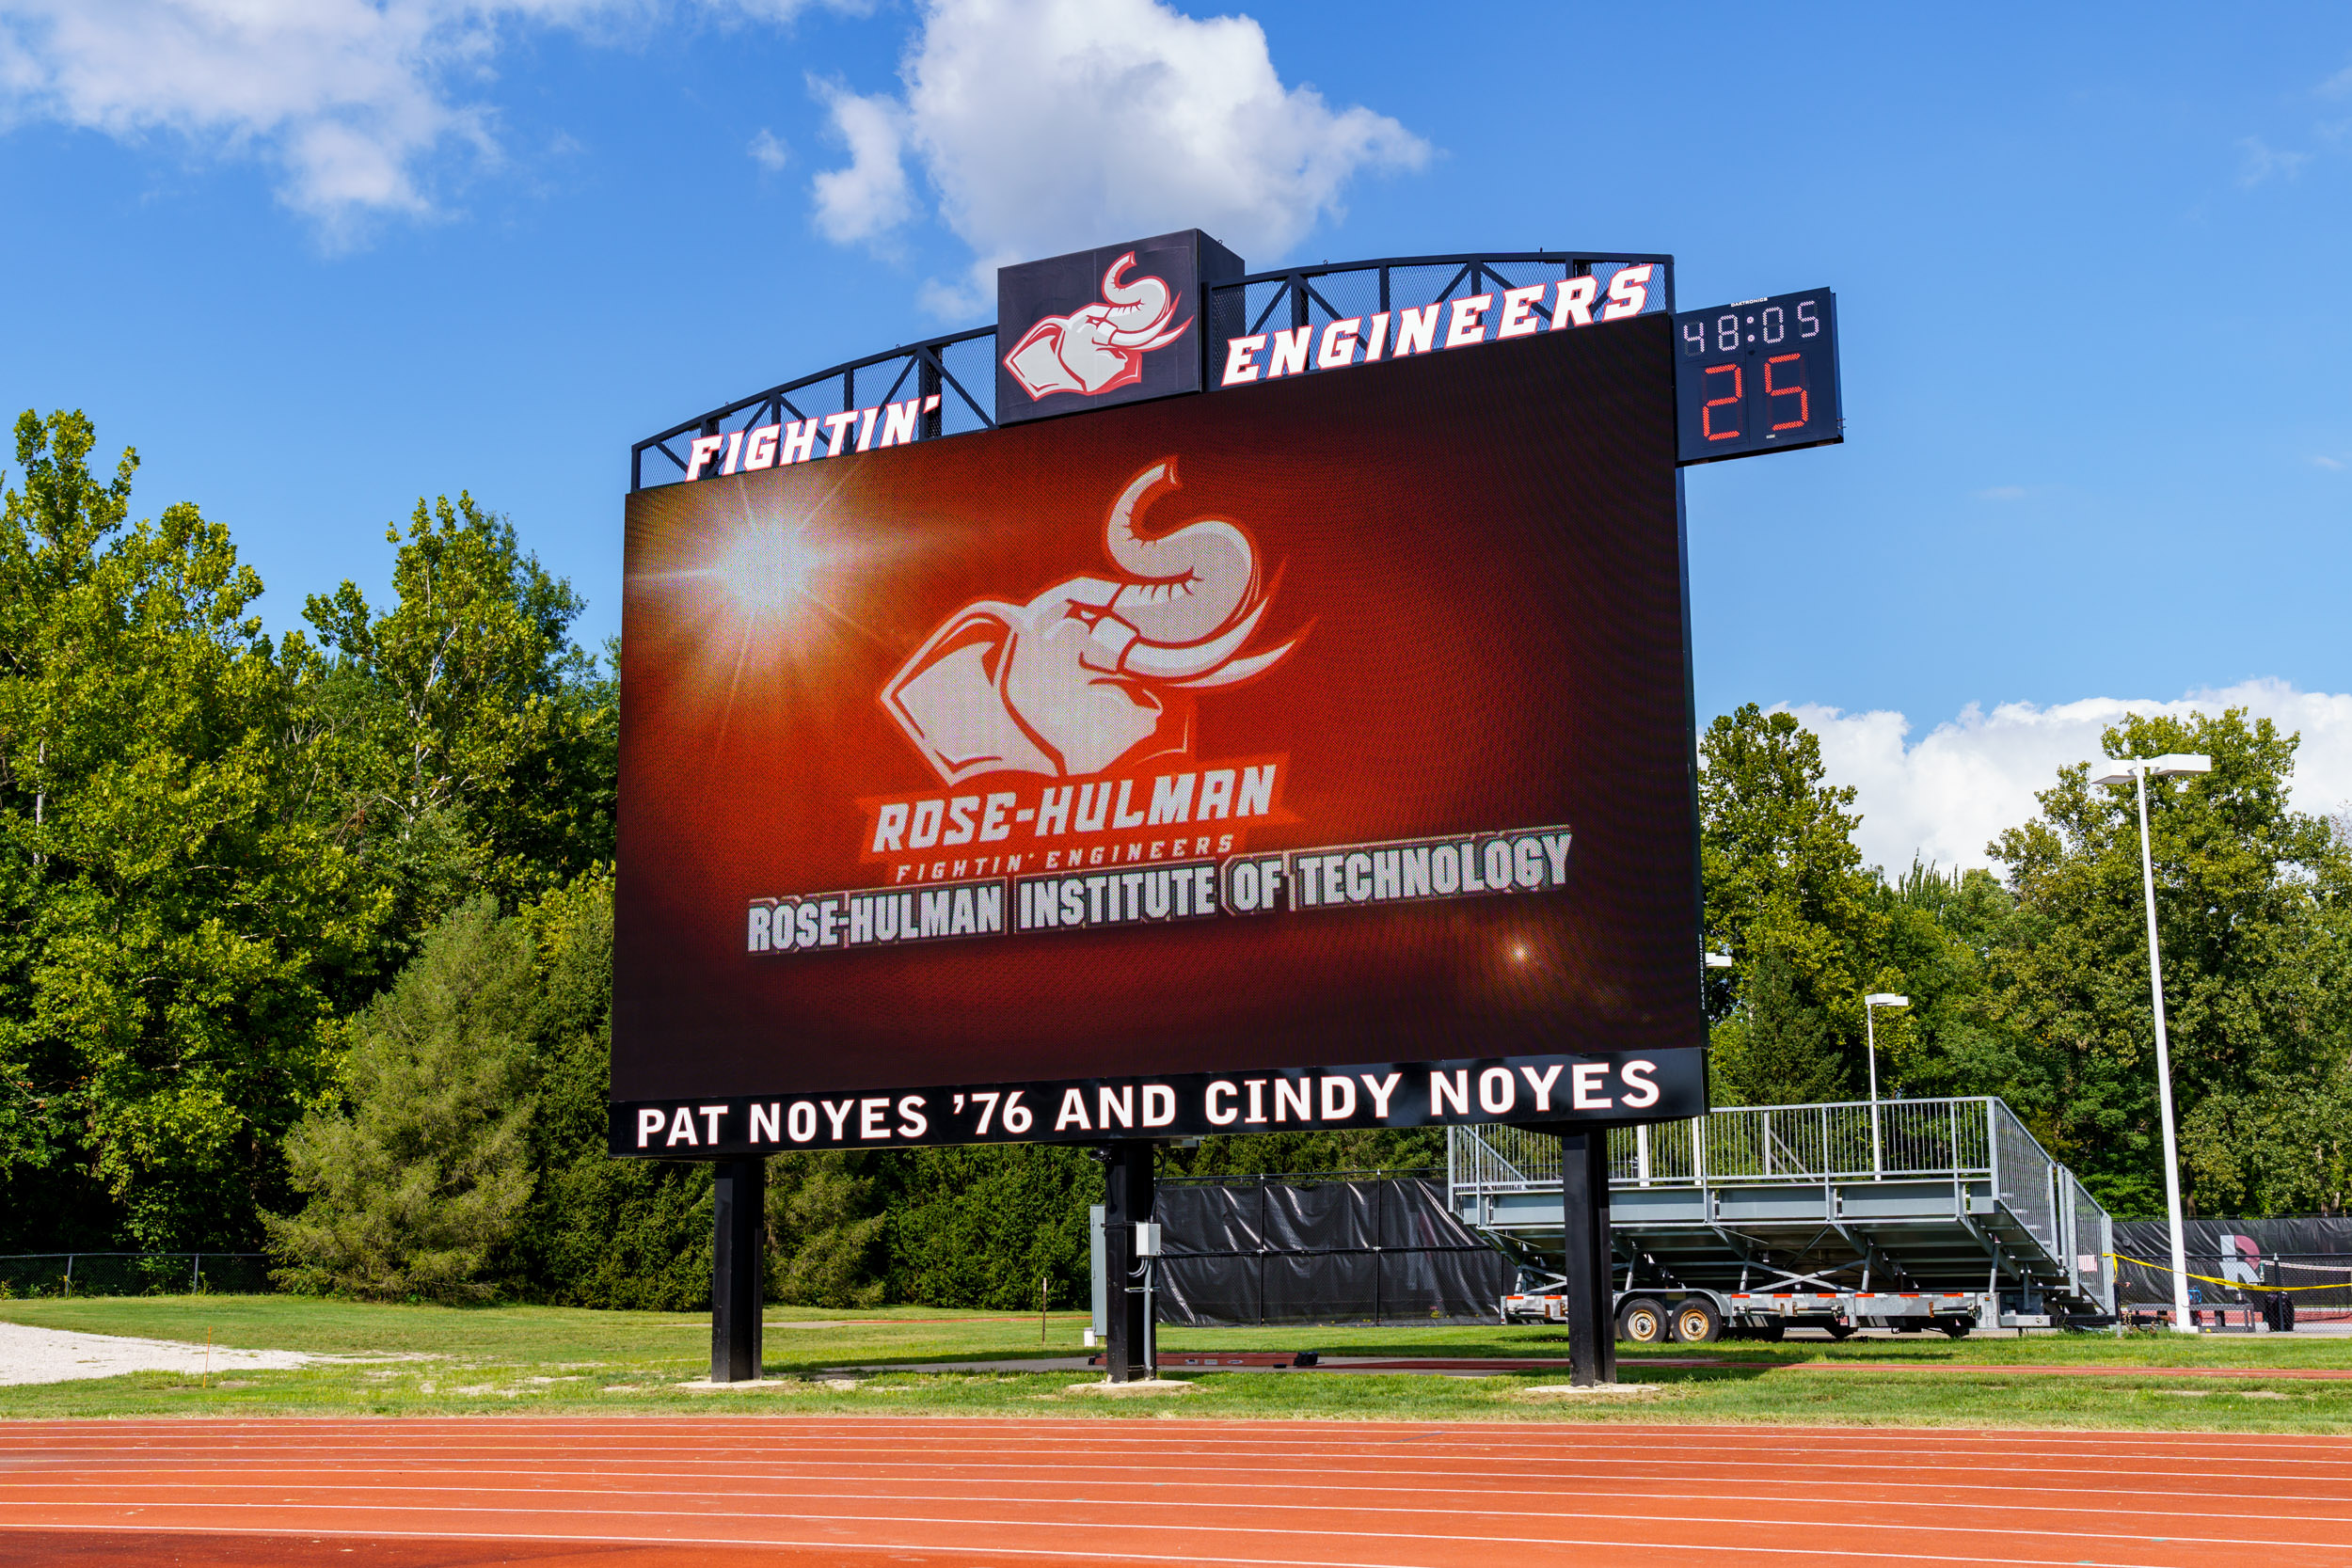 New Football Scoreboard at RoseHulman Institute of Technology One of